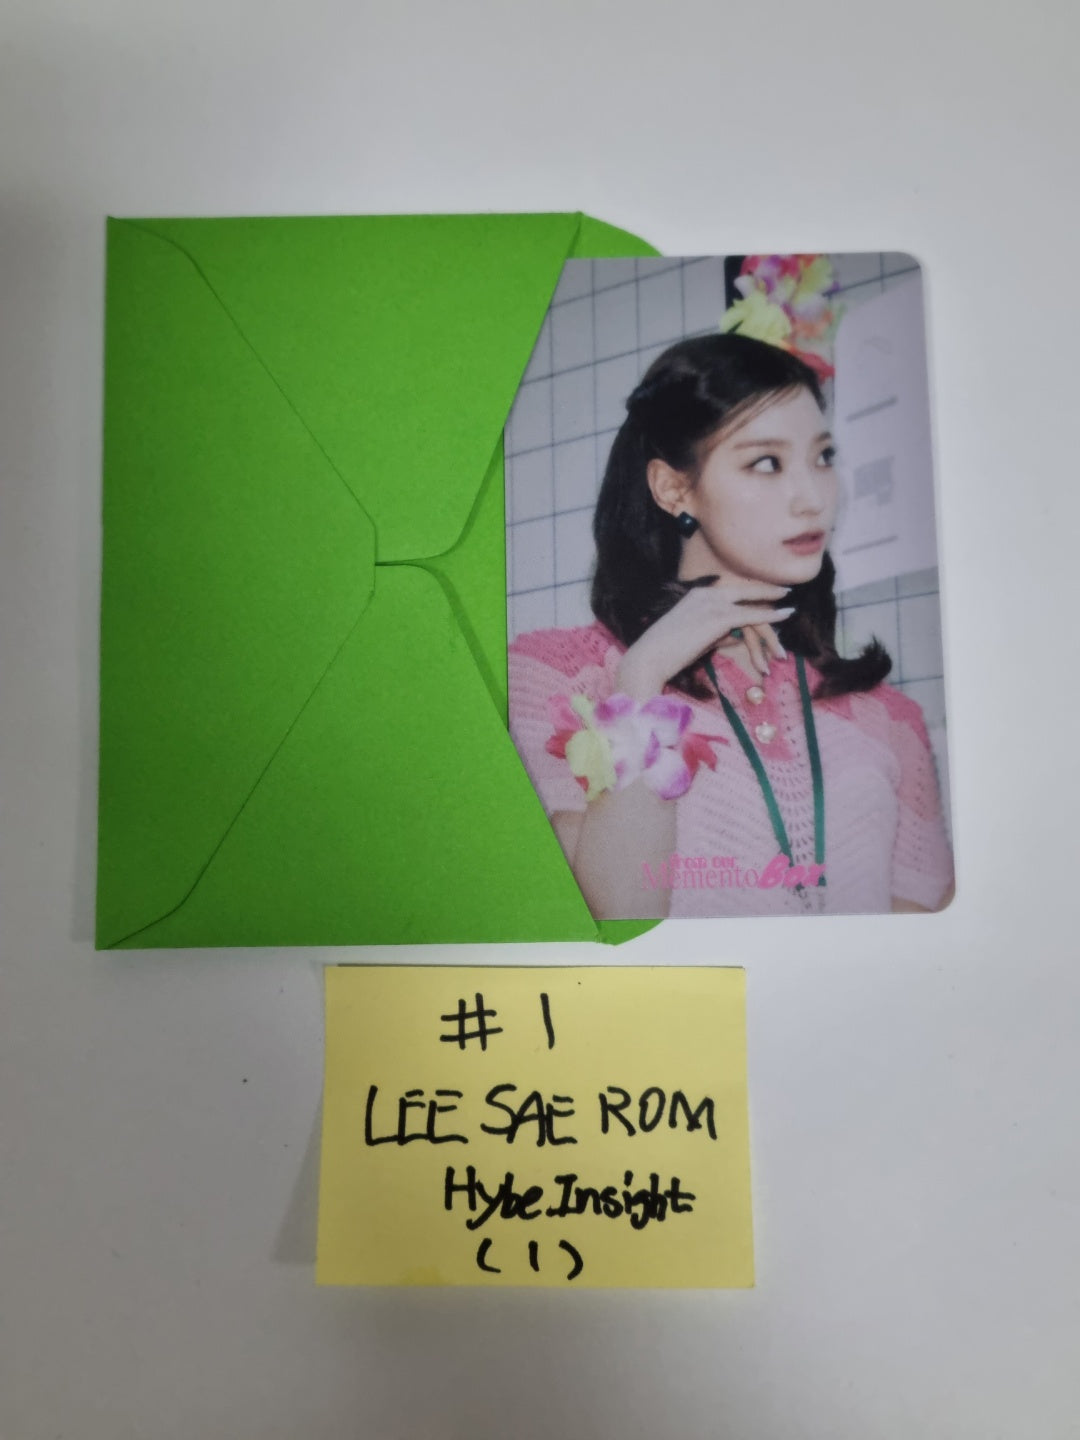 Fromis_9 "from our Memento Box" - Hybe Insight イベント PVC フォトカード